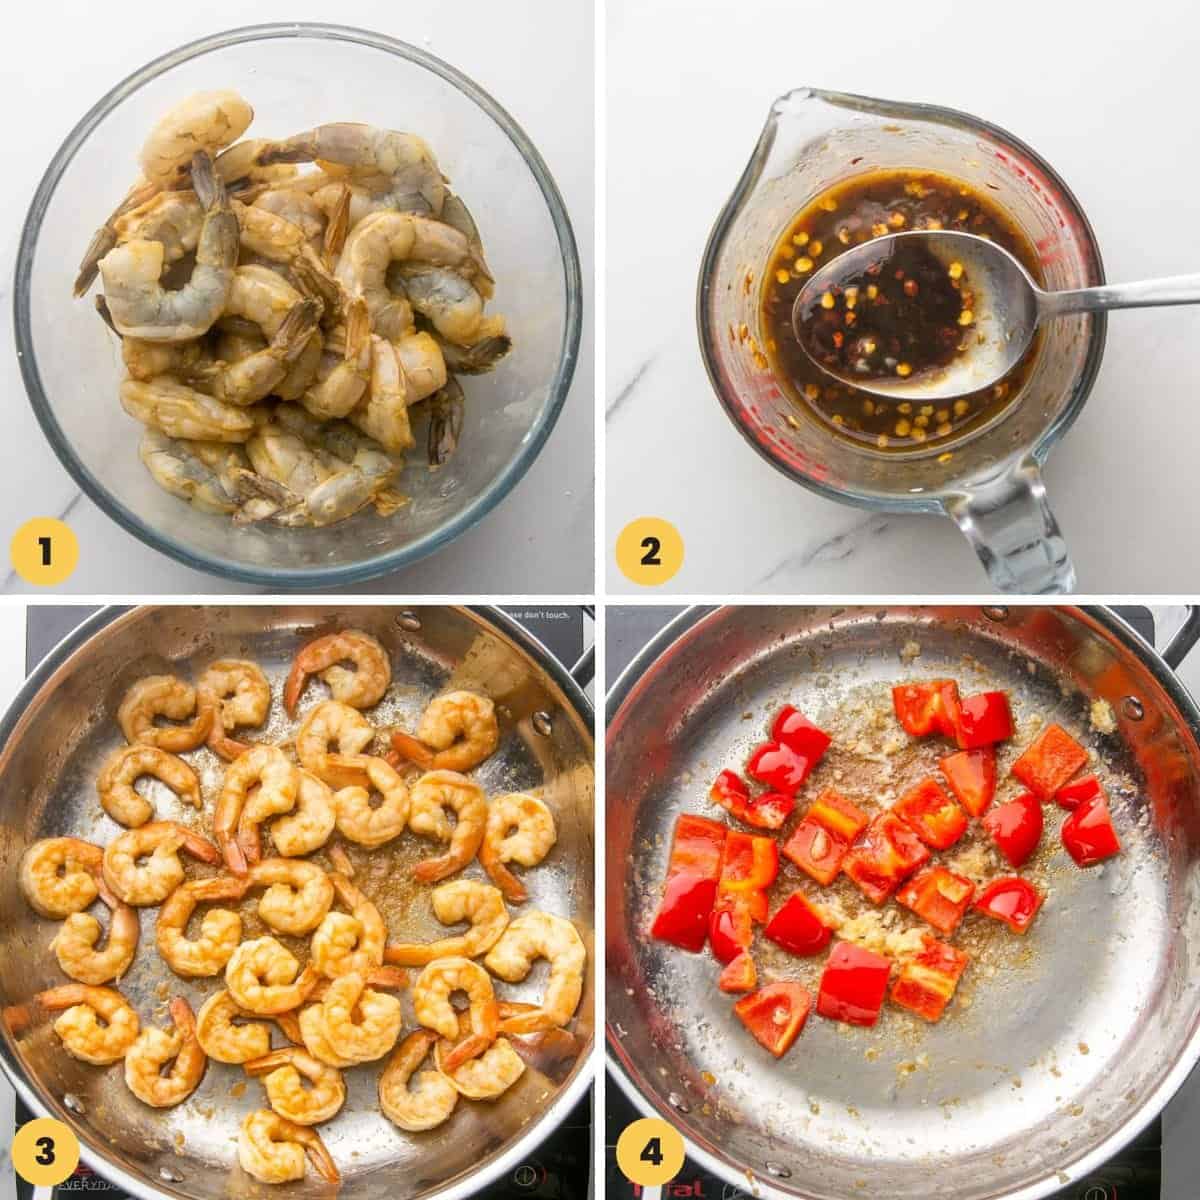 Collage of four images showing how to marinate shrimp, make kung pao sauce, cook shrimp and veggies.